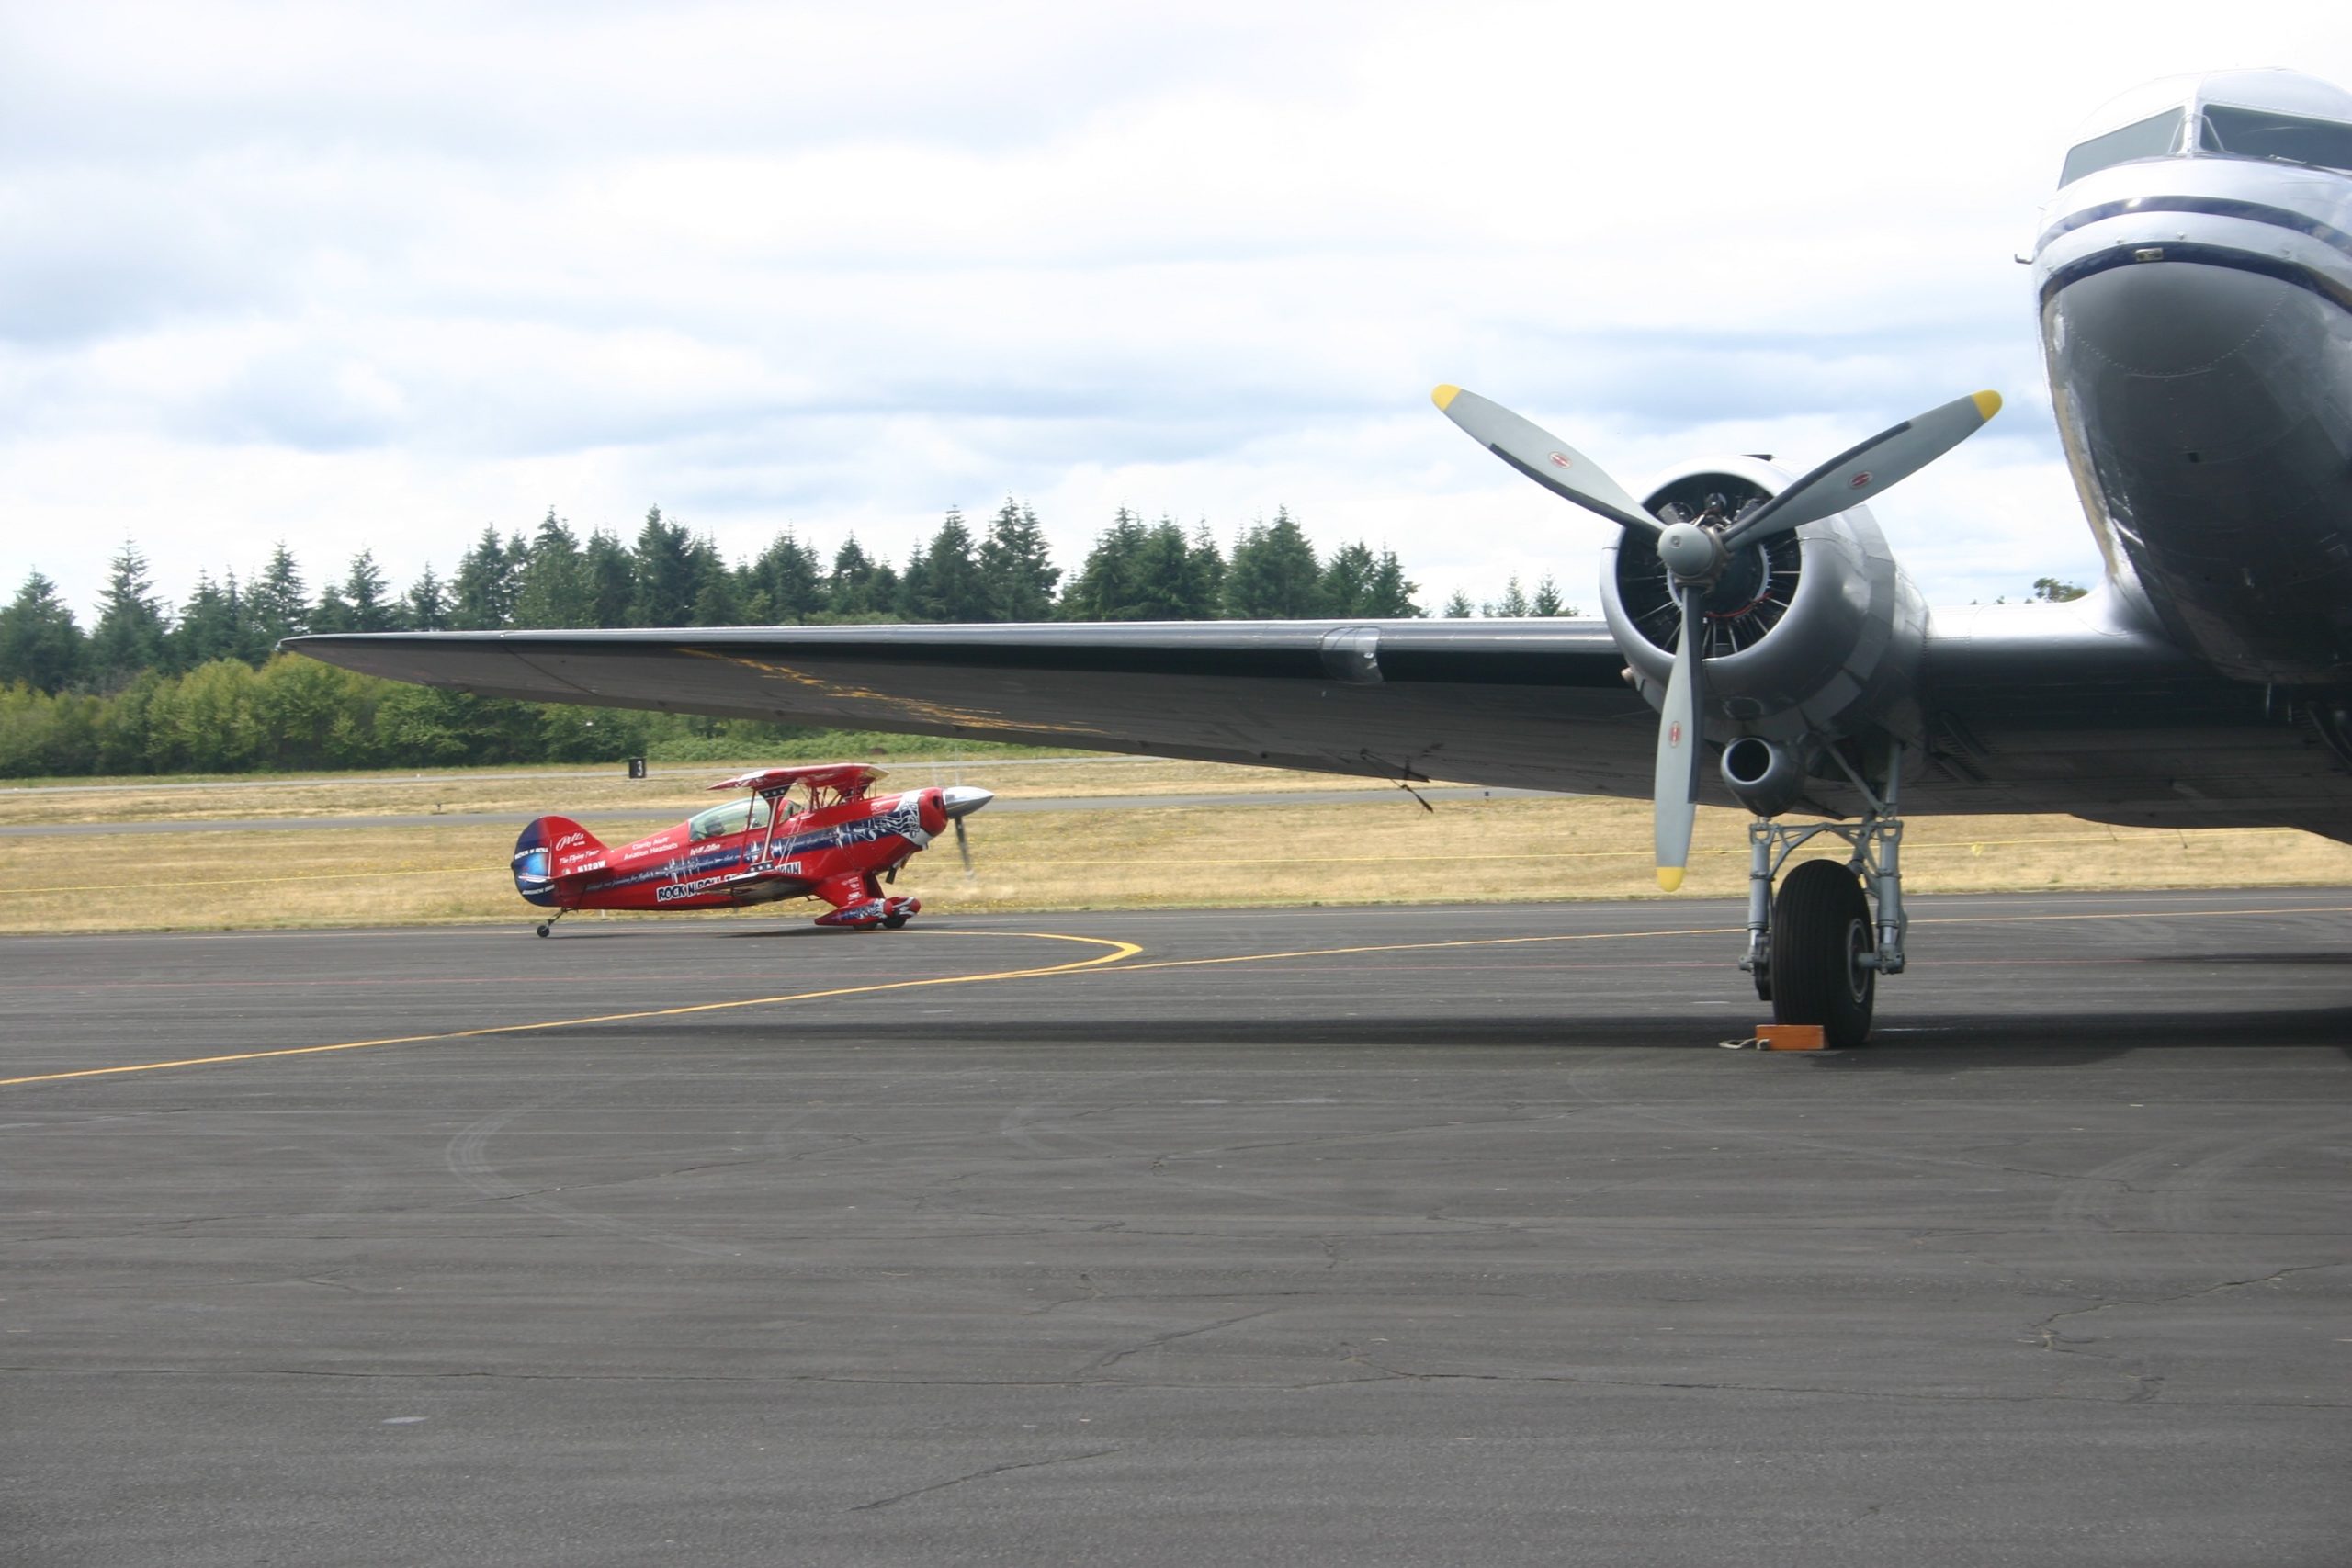 "The Flying Tenor", Will Allen of Renton, taxis his Pitts Special biplane past a vintage DC-3 at Tacoma Narrows Airport, Saturday, July 2. Credit: David Guest / TDI